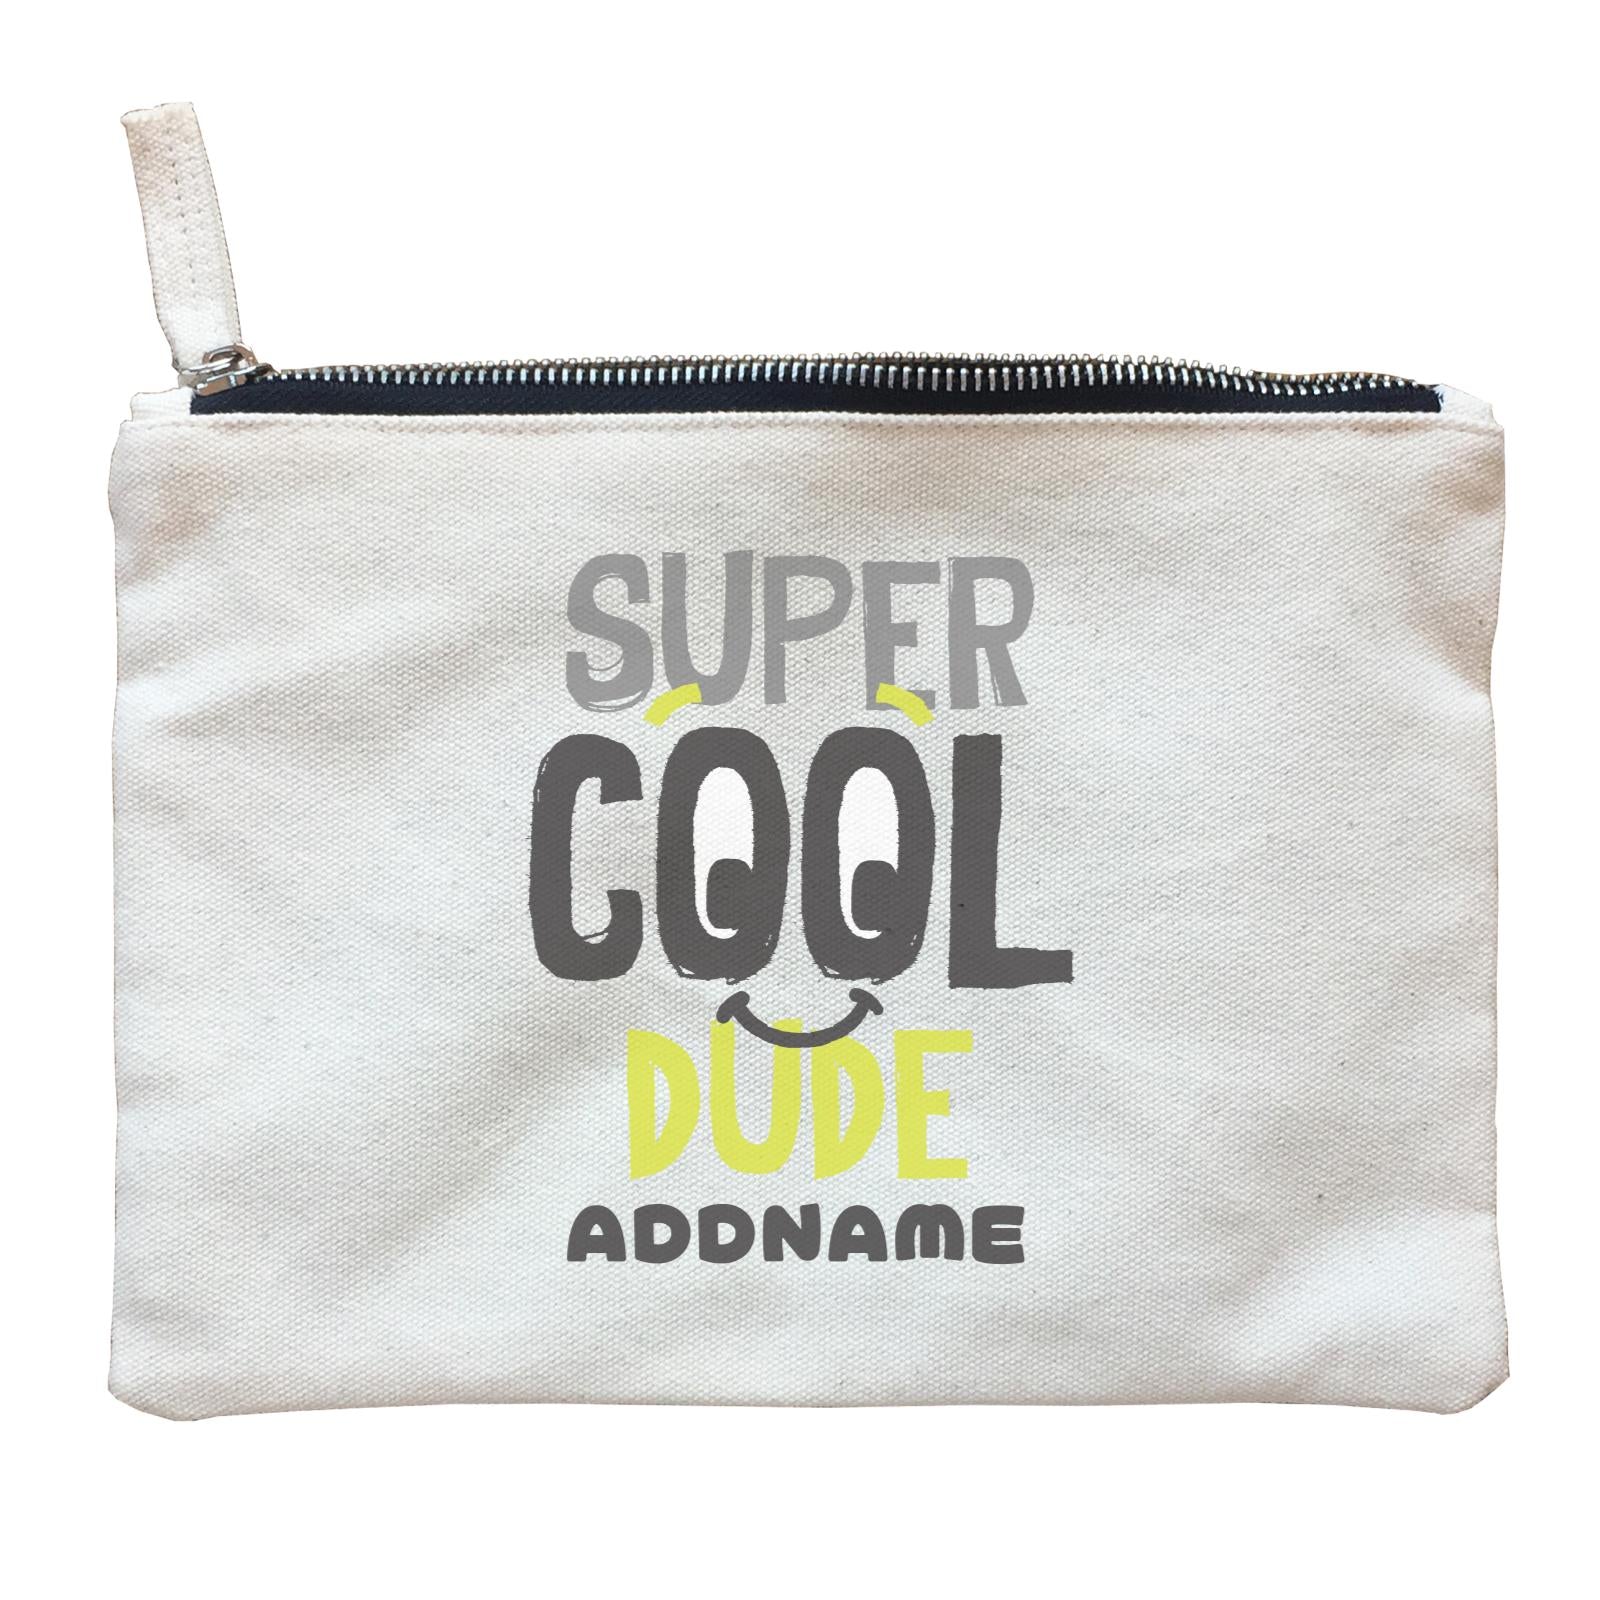 Super Cool Dude with Smiley Addname Zipper Pouch